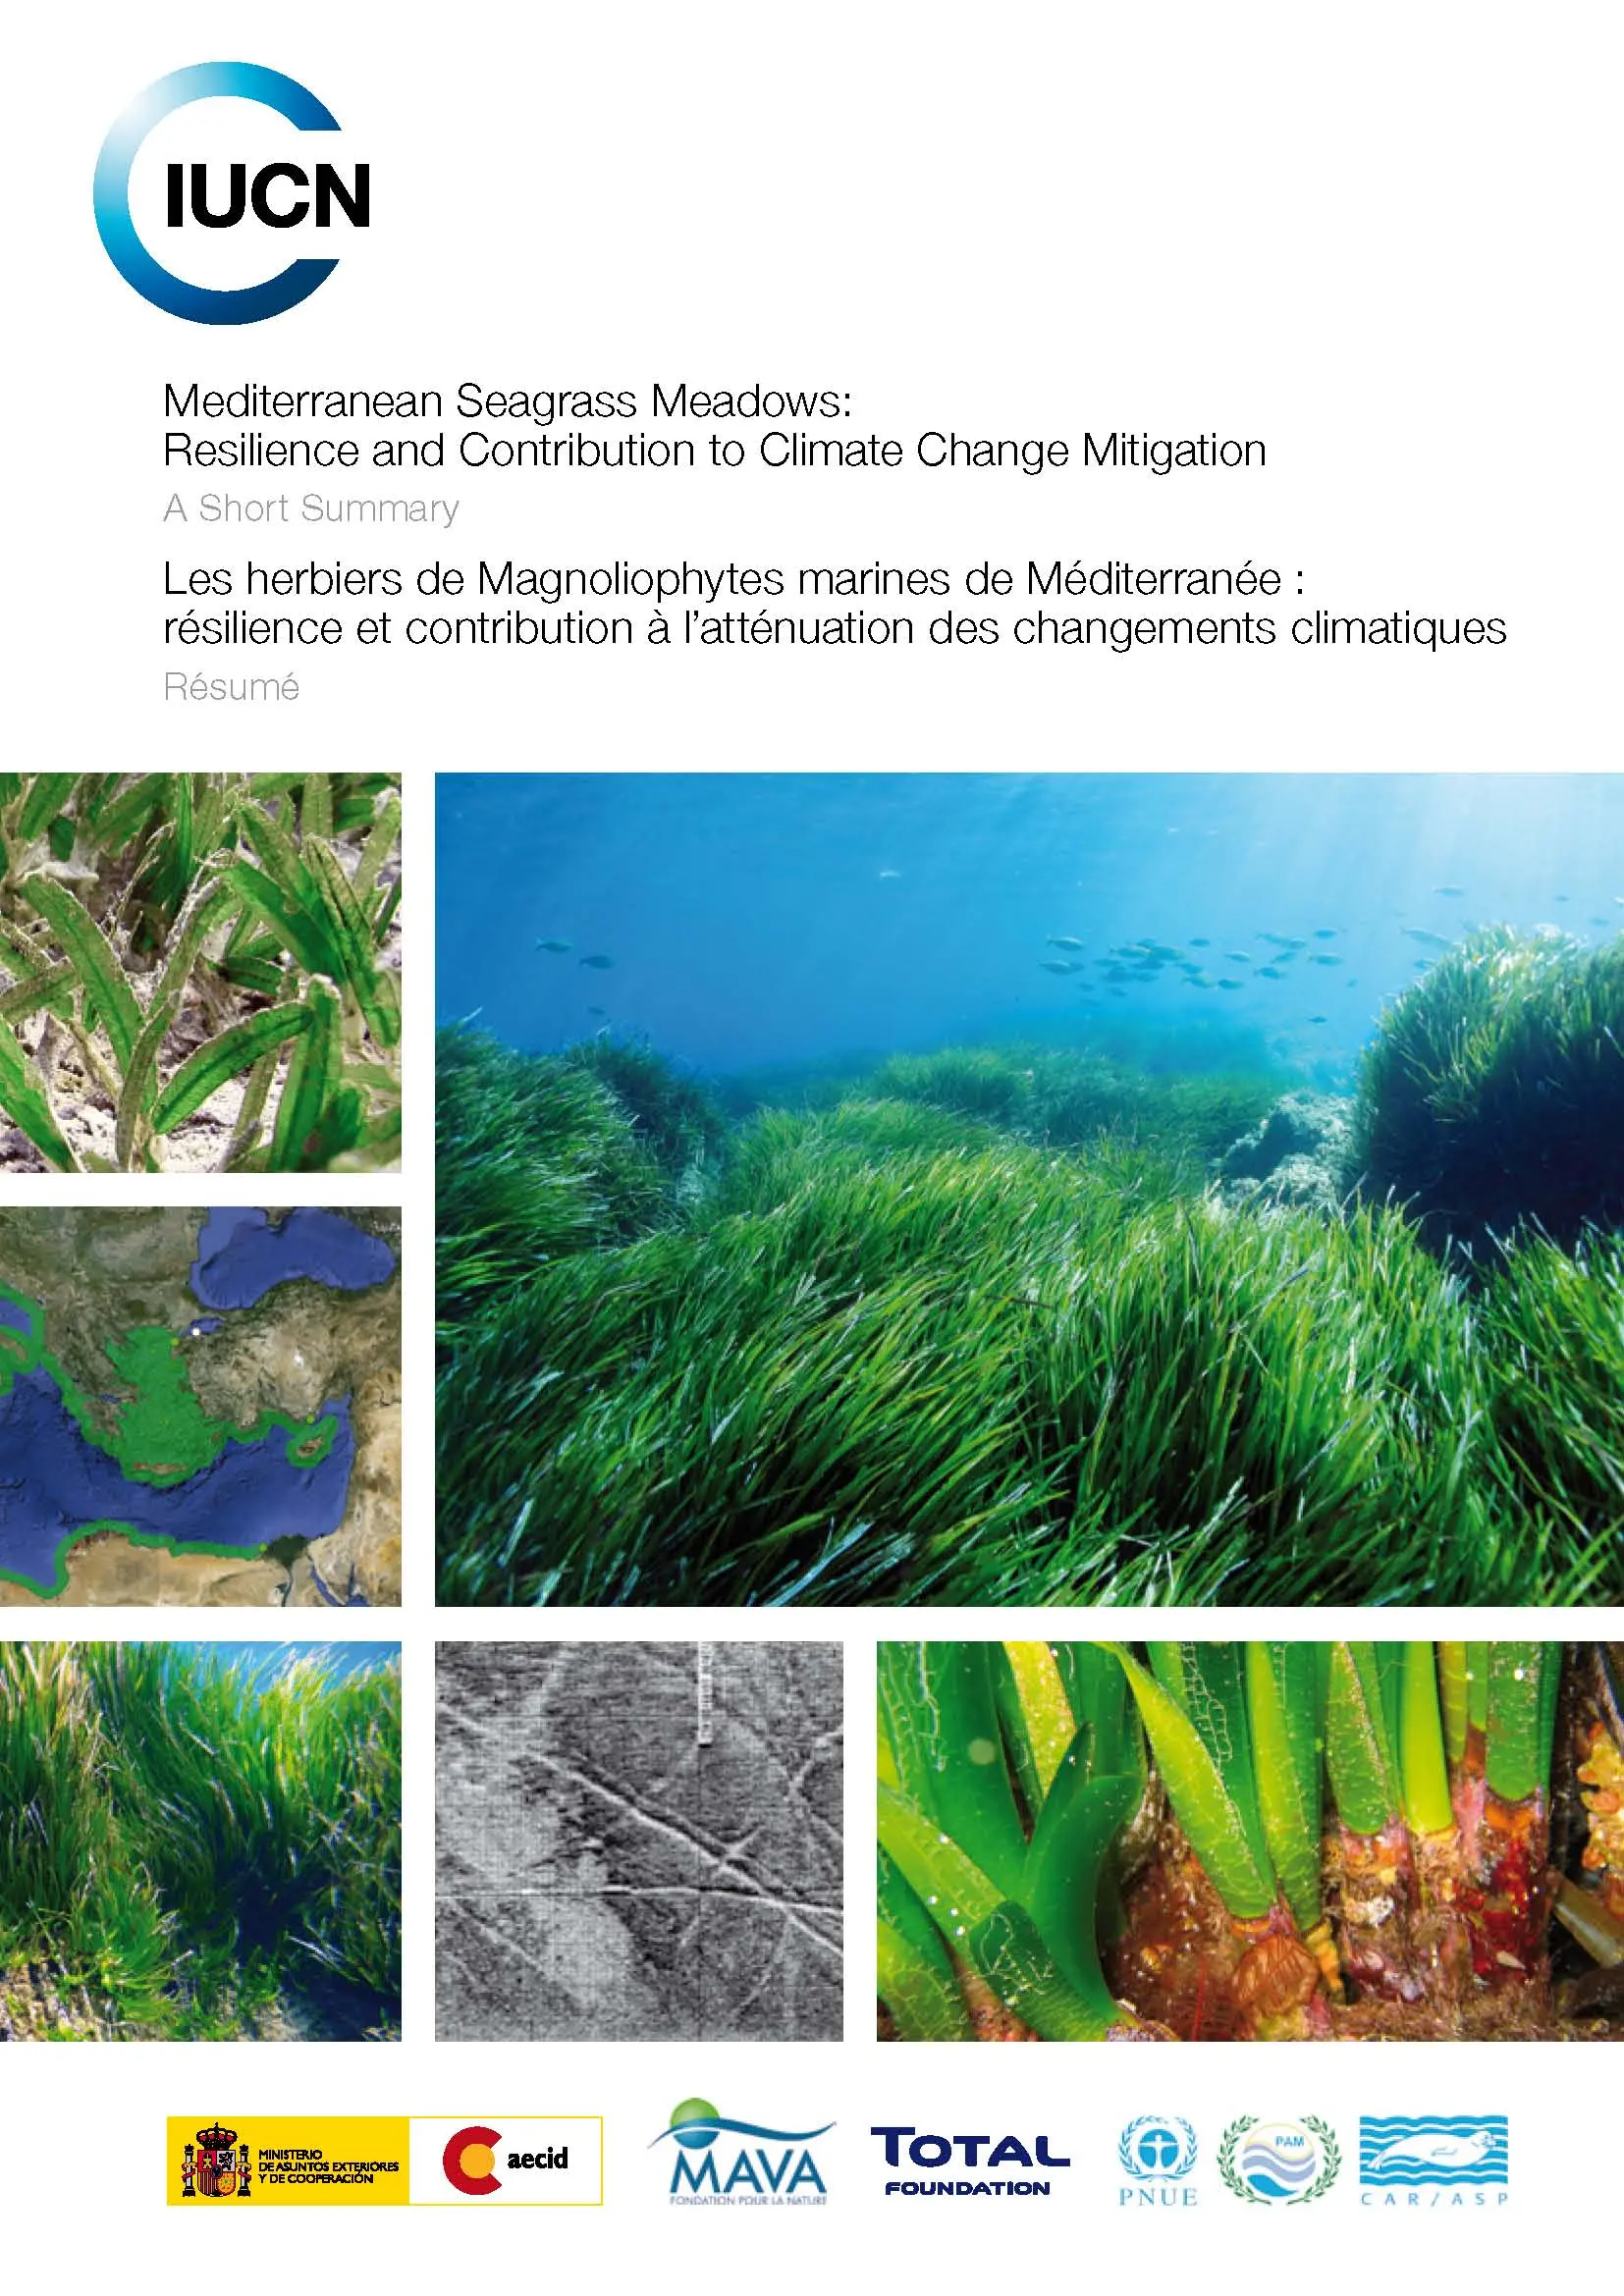 Mediterranean Seagrass Meadows:
Resilience and Contribution to Climate Change Mitigation